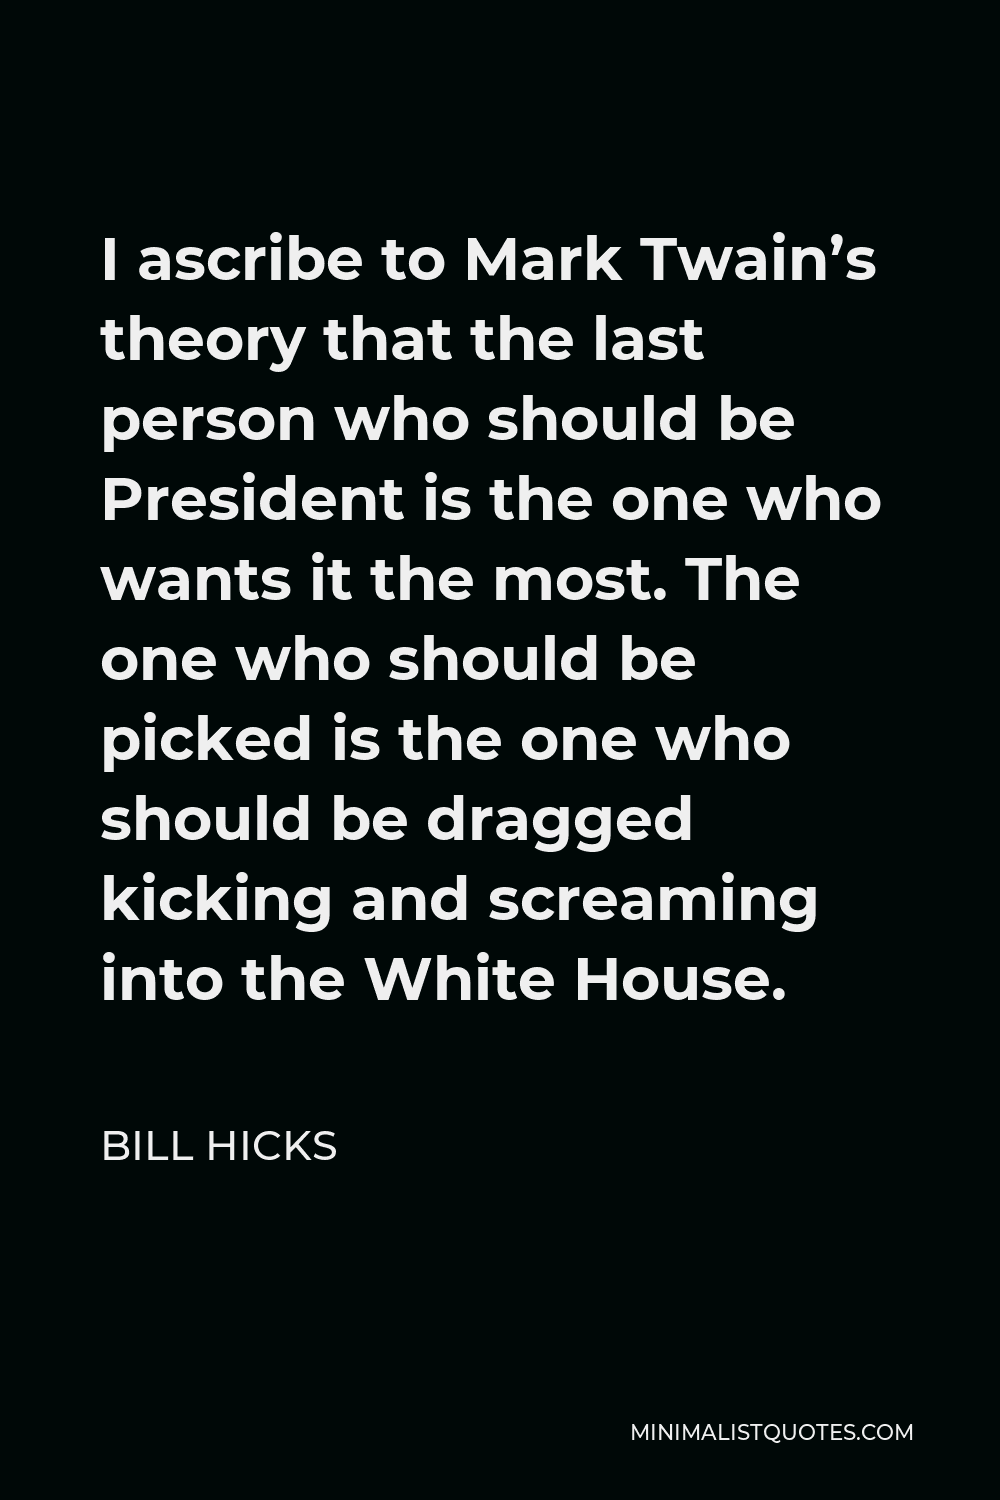 Bill Hicks Quote - I ascribe to Mark Twain’s theory that the last person who should be President is the one who wants it the most. The one who should be picked is the one who should be dragged kicking and screaming into the White House.